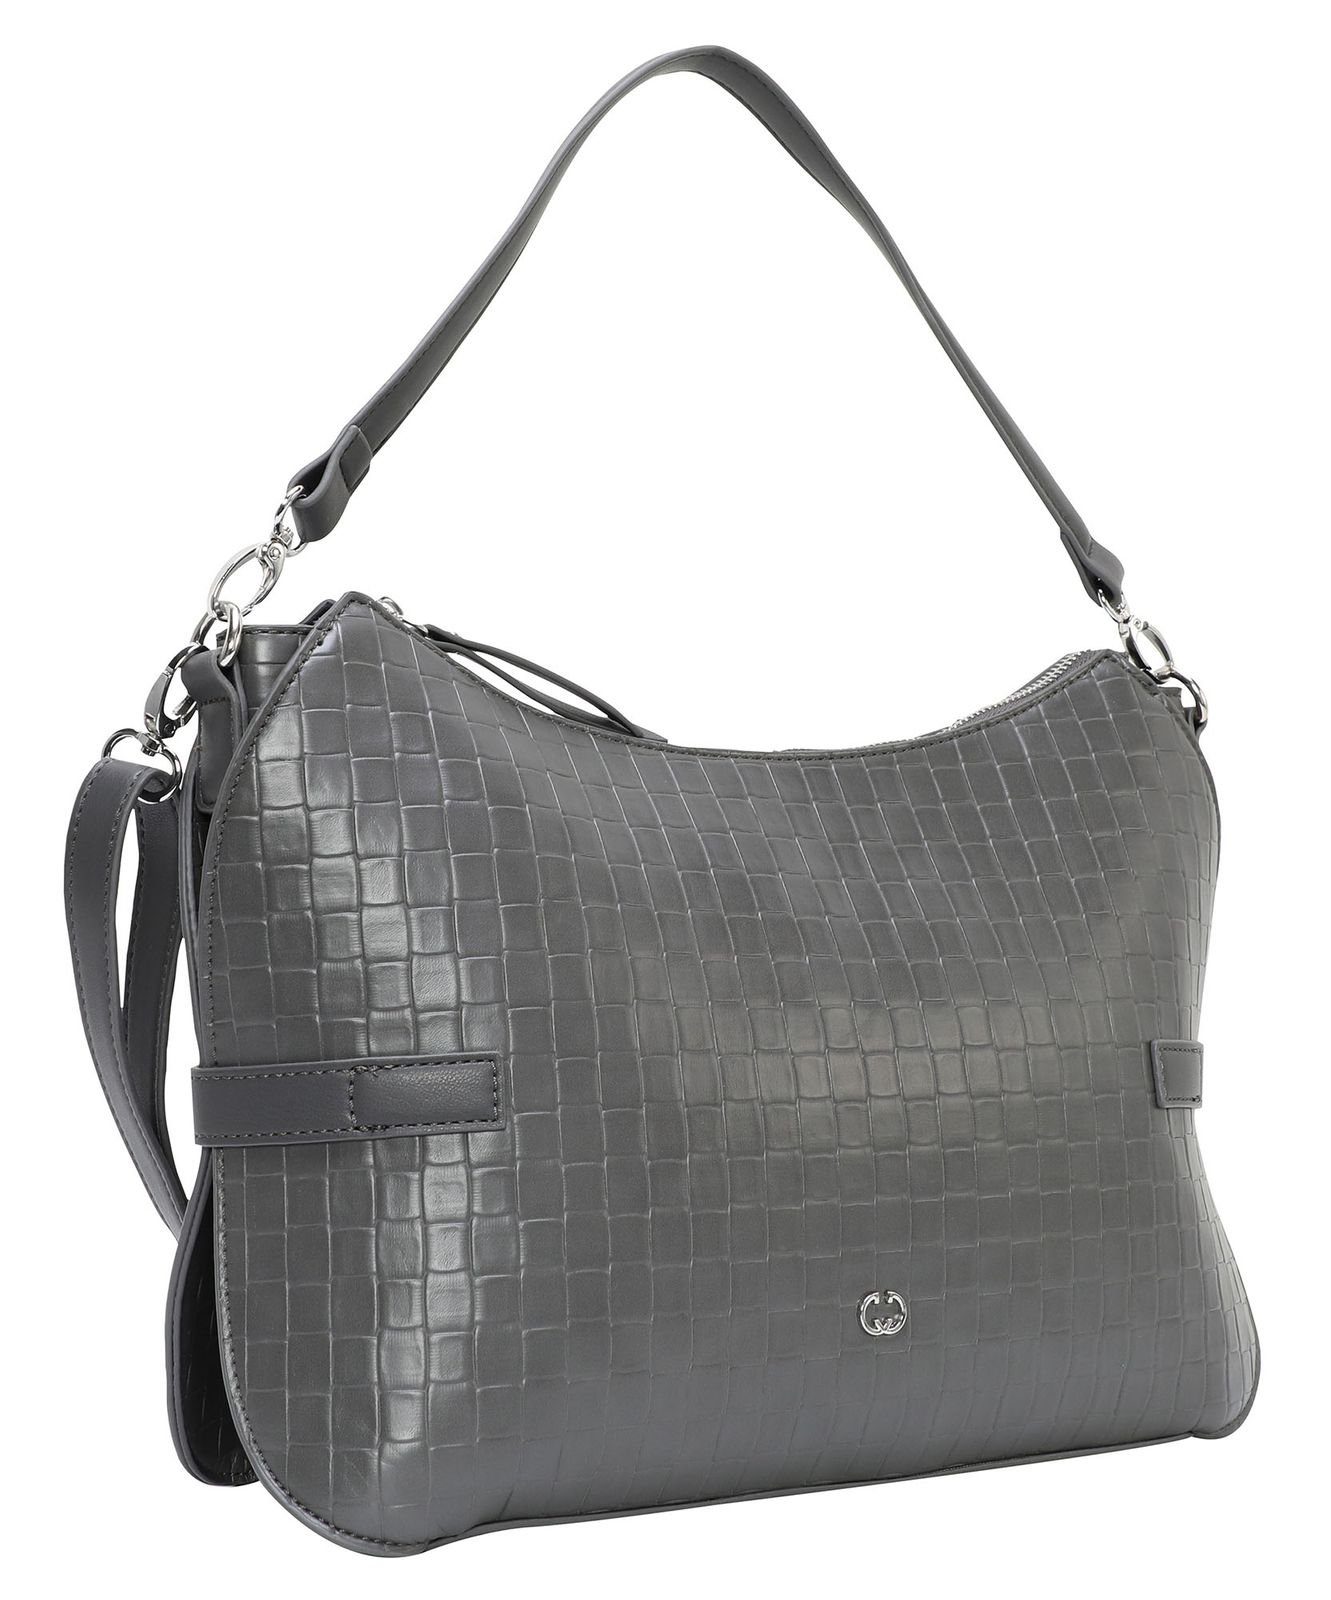 For Schultertasche WEBER GERRY Me Grey Fall